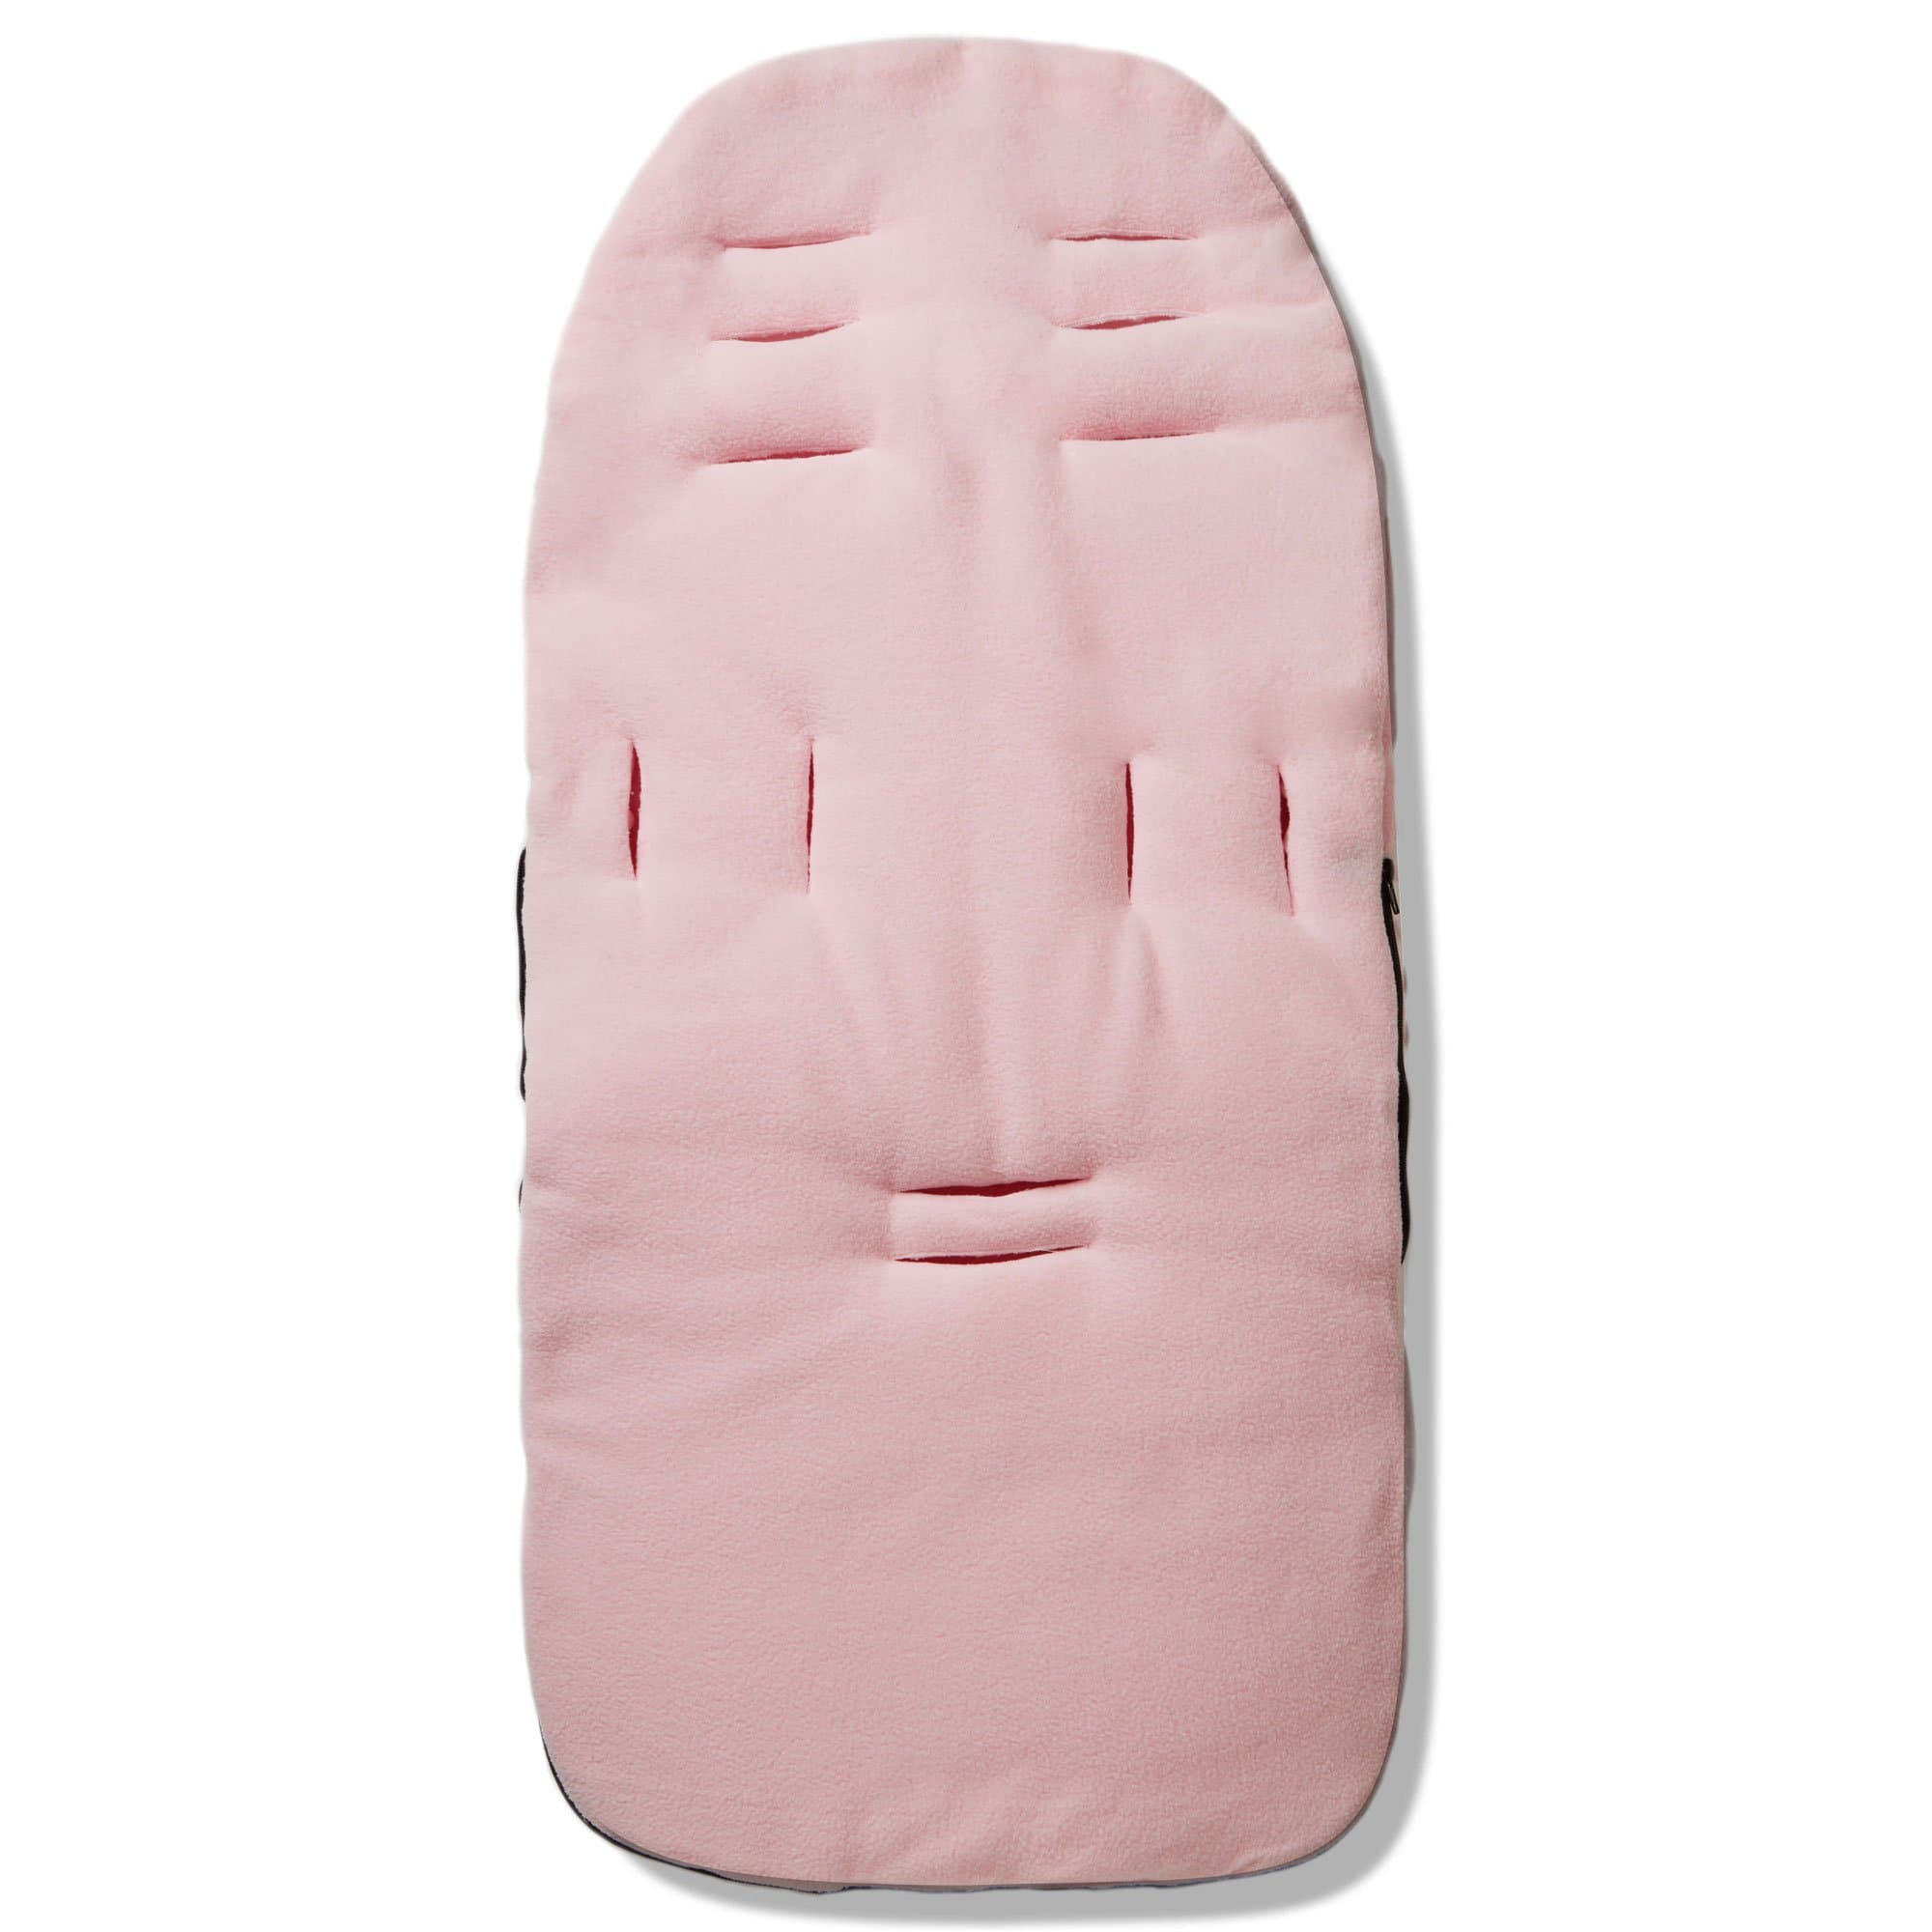 Dimple Footmuff / Cosy Toes Compatible with Kiddicouture - For Your Little One